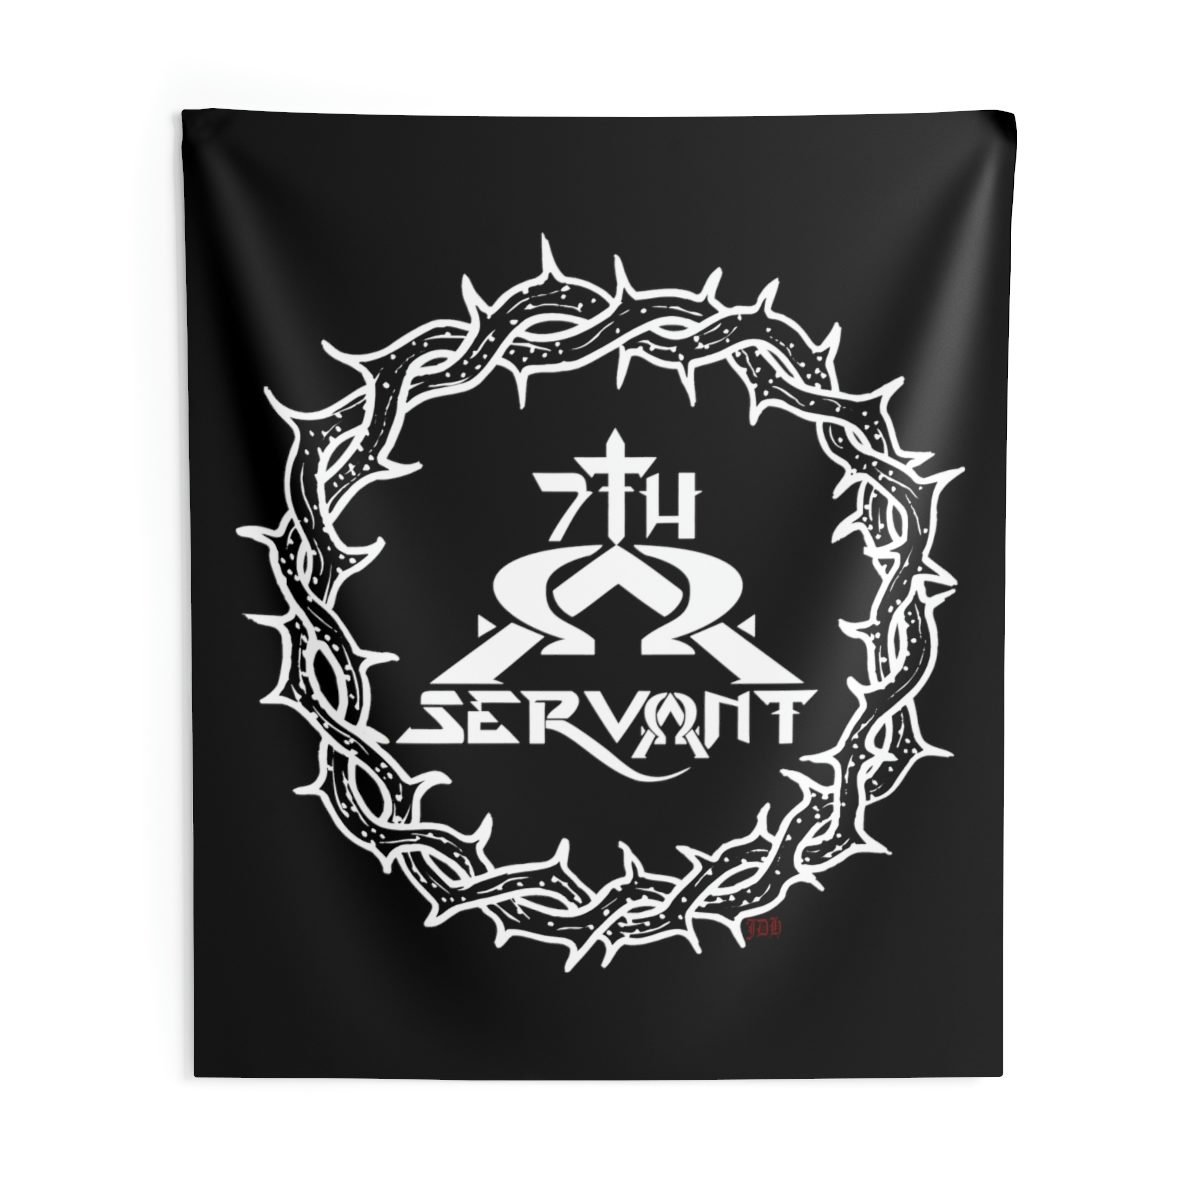 Seventh Servant Alpha and Omega Indoor Wall Tapestries